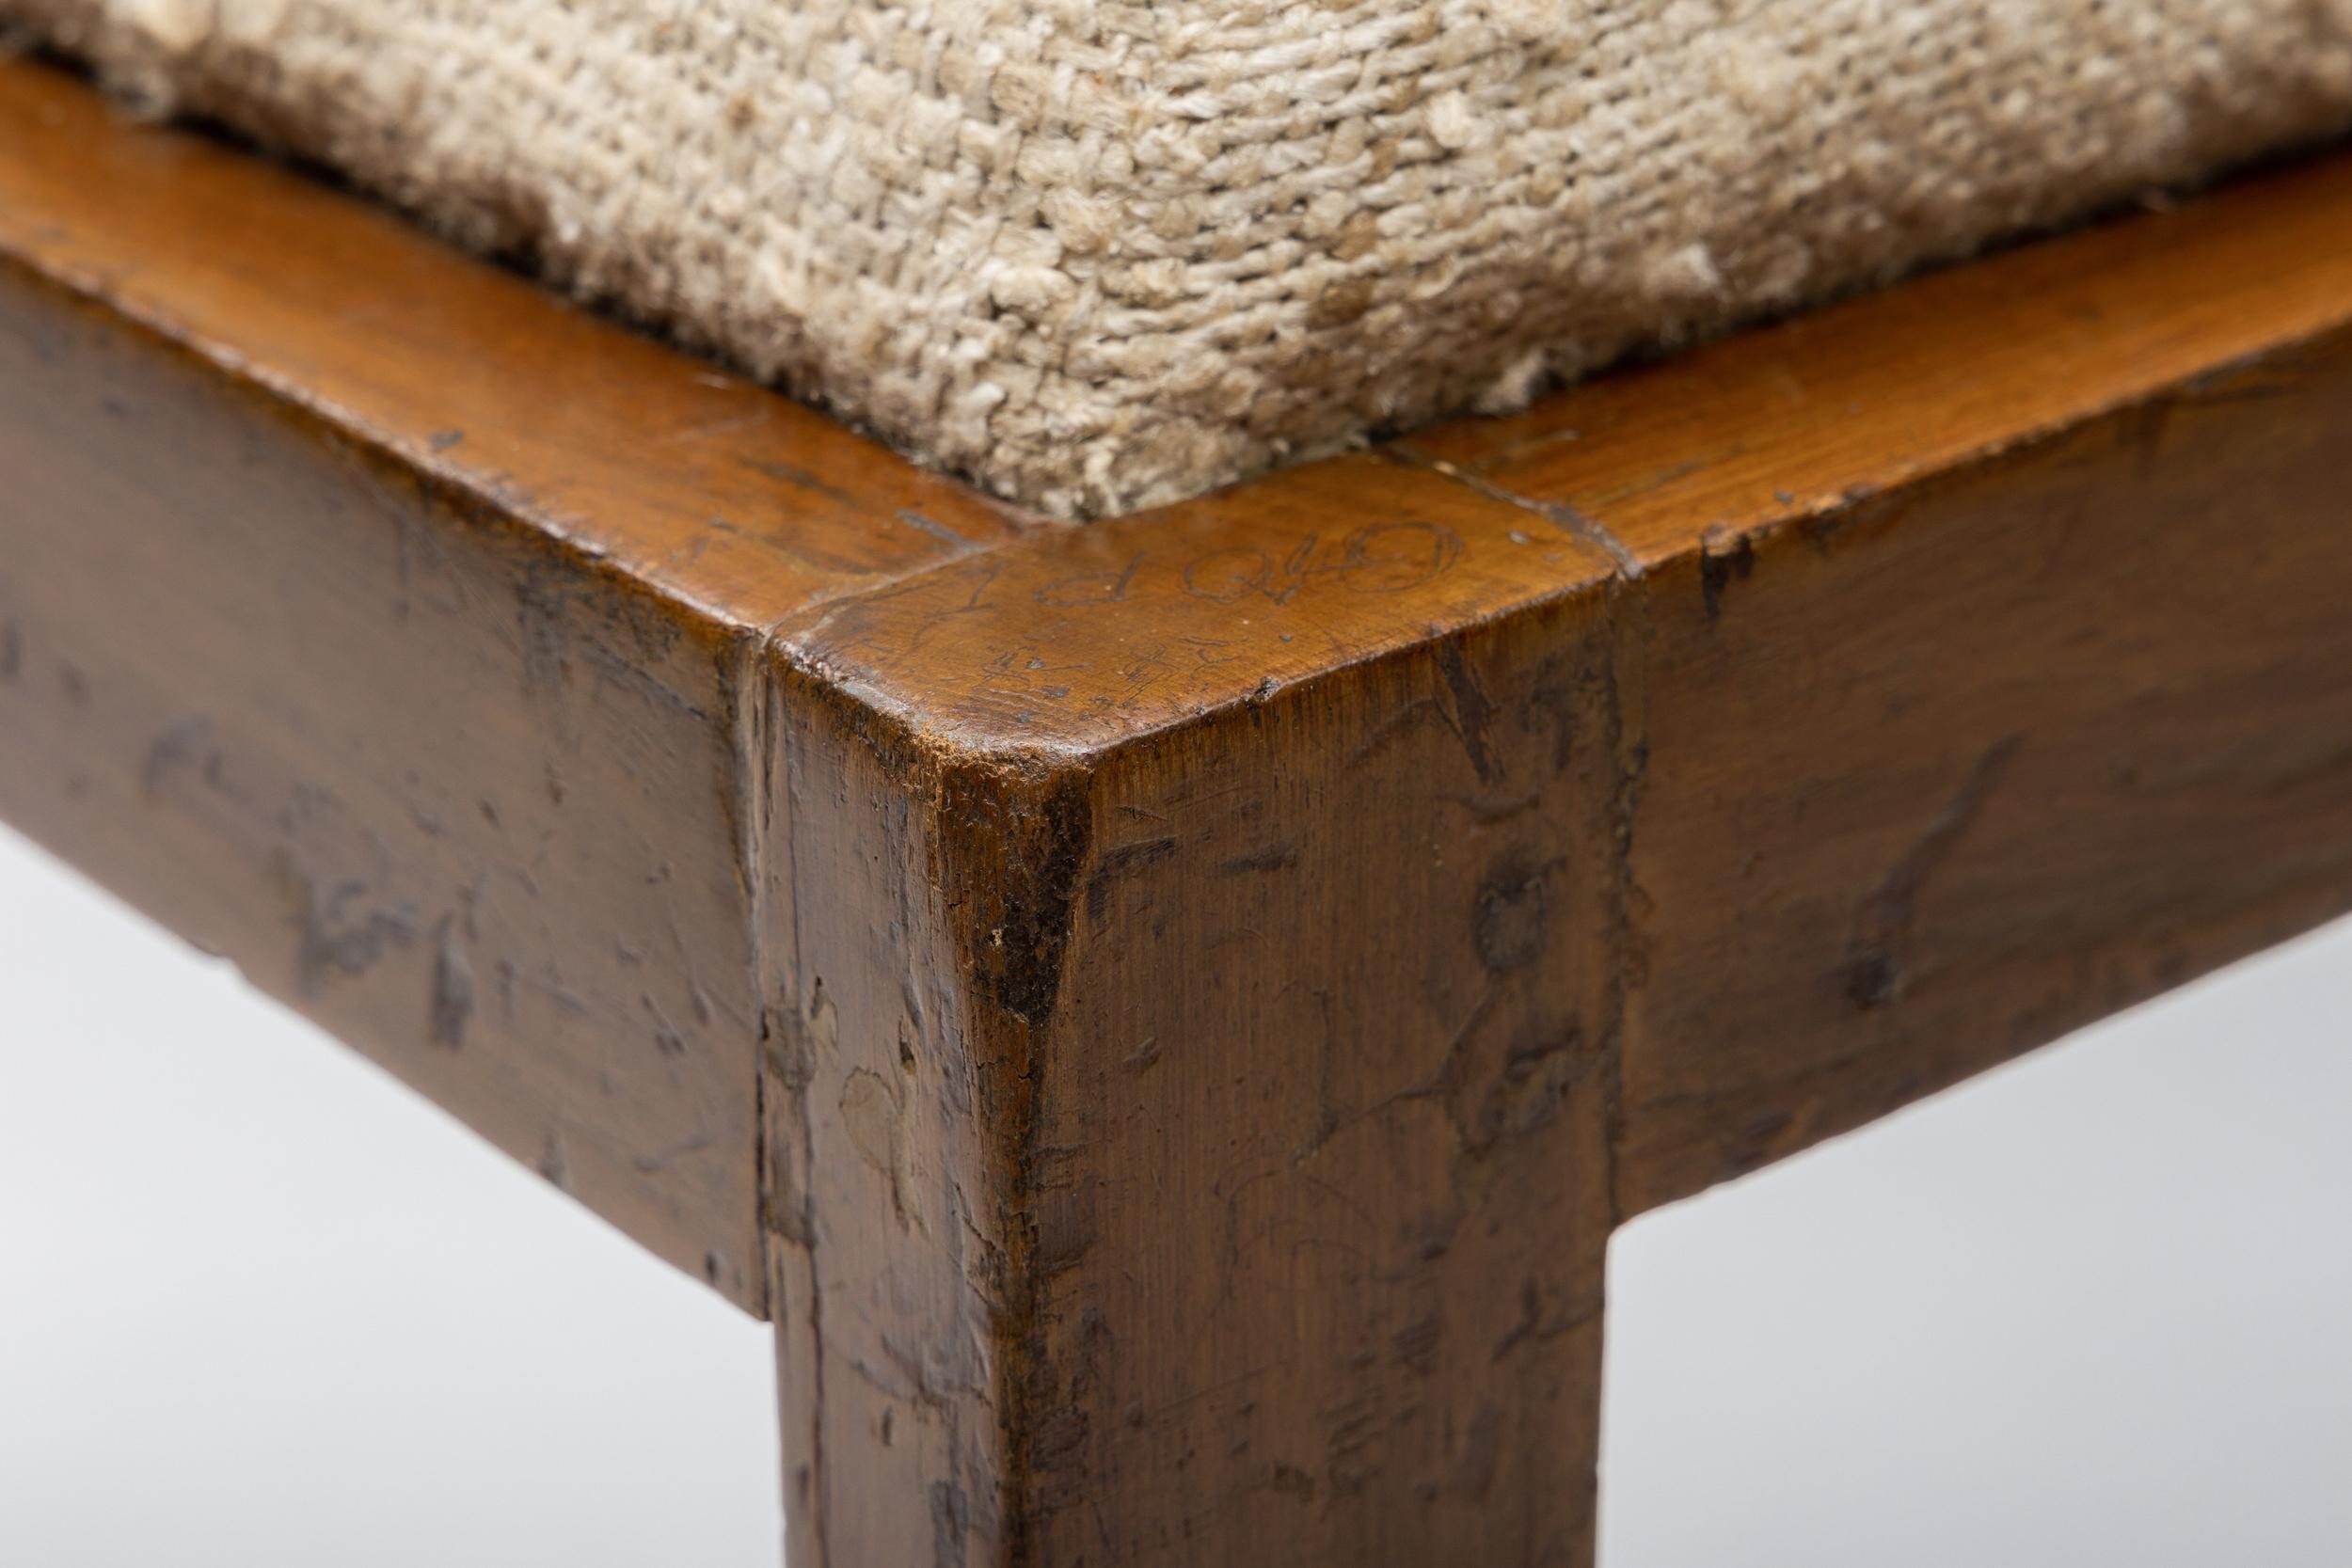 Pierre Jeanneret Chandigarh Prototype Stool, Woven Linen Seating, India, 1960's For Sale 5